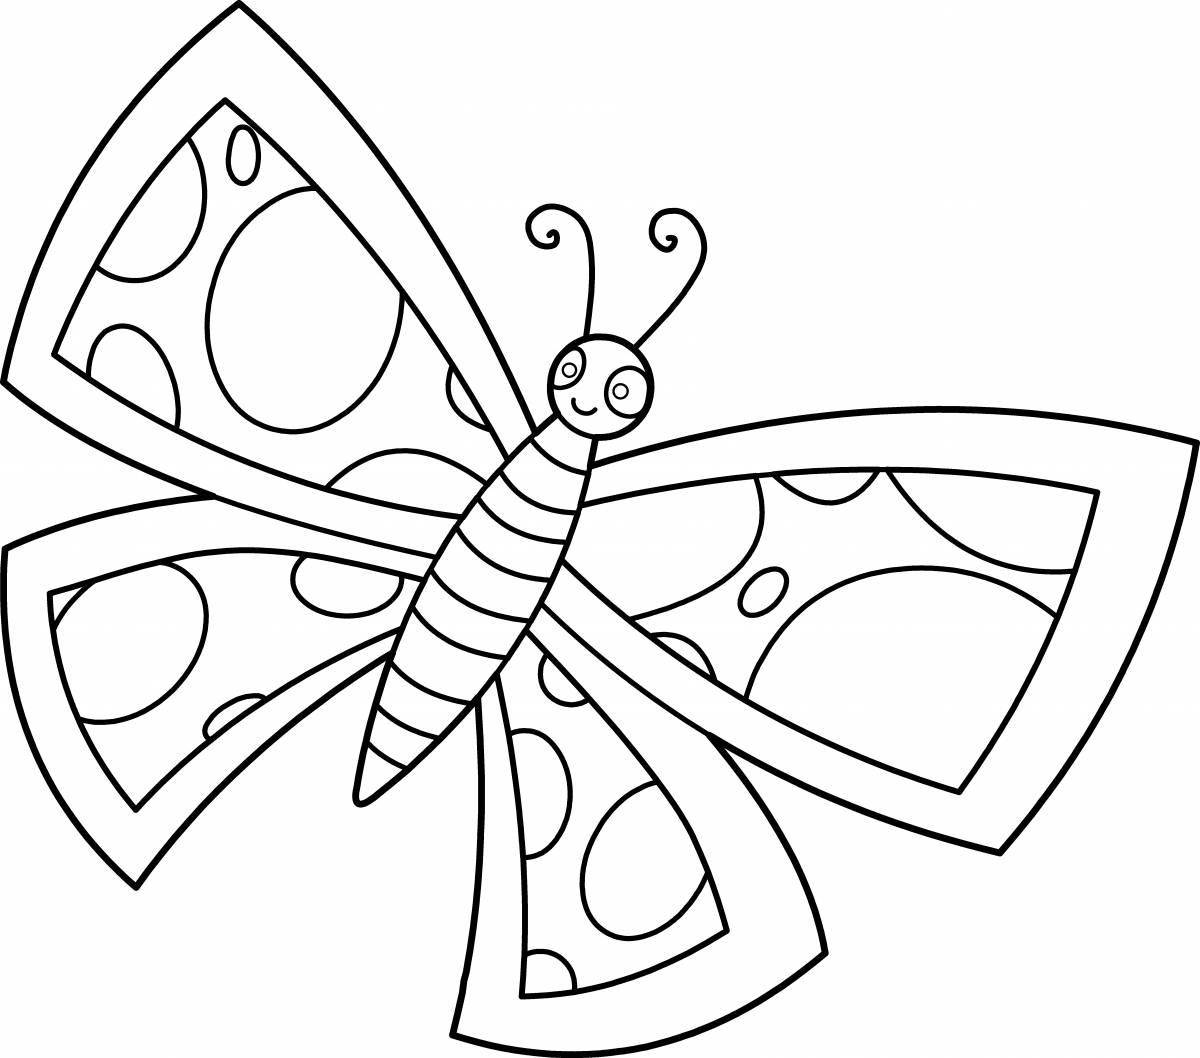 Bright butterfly coloring book